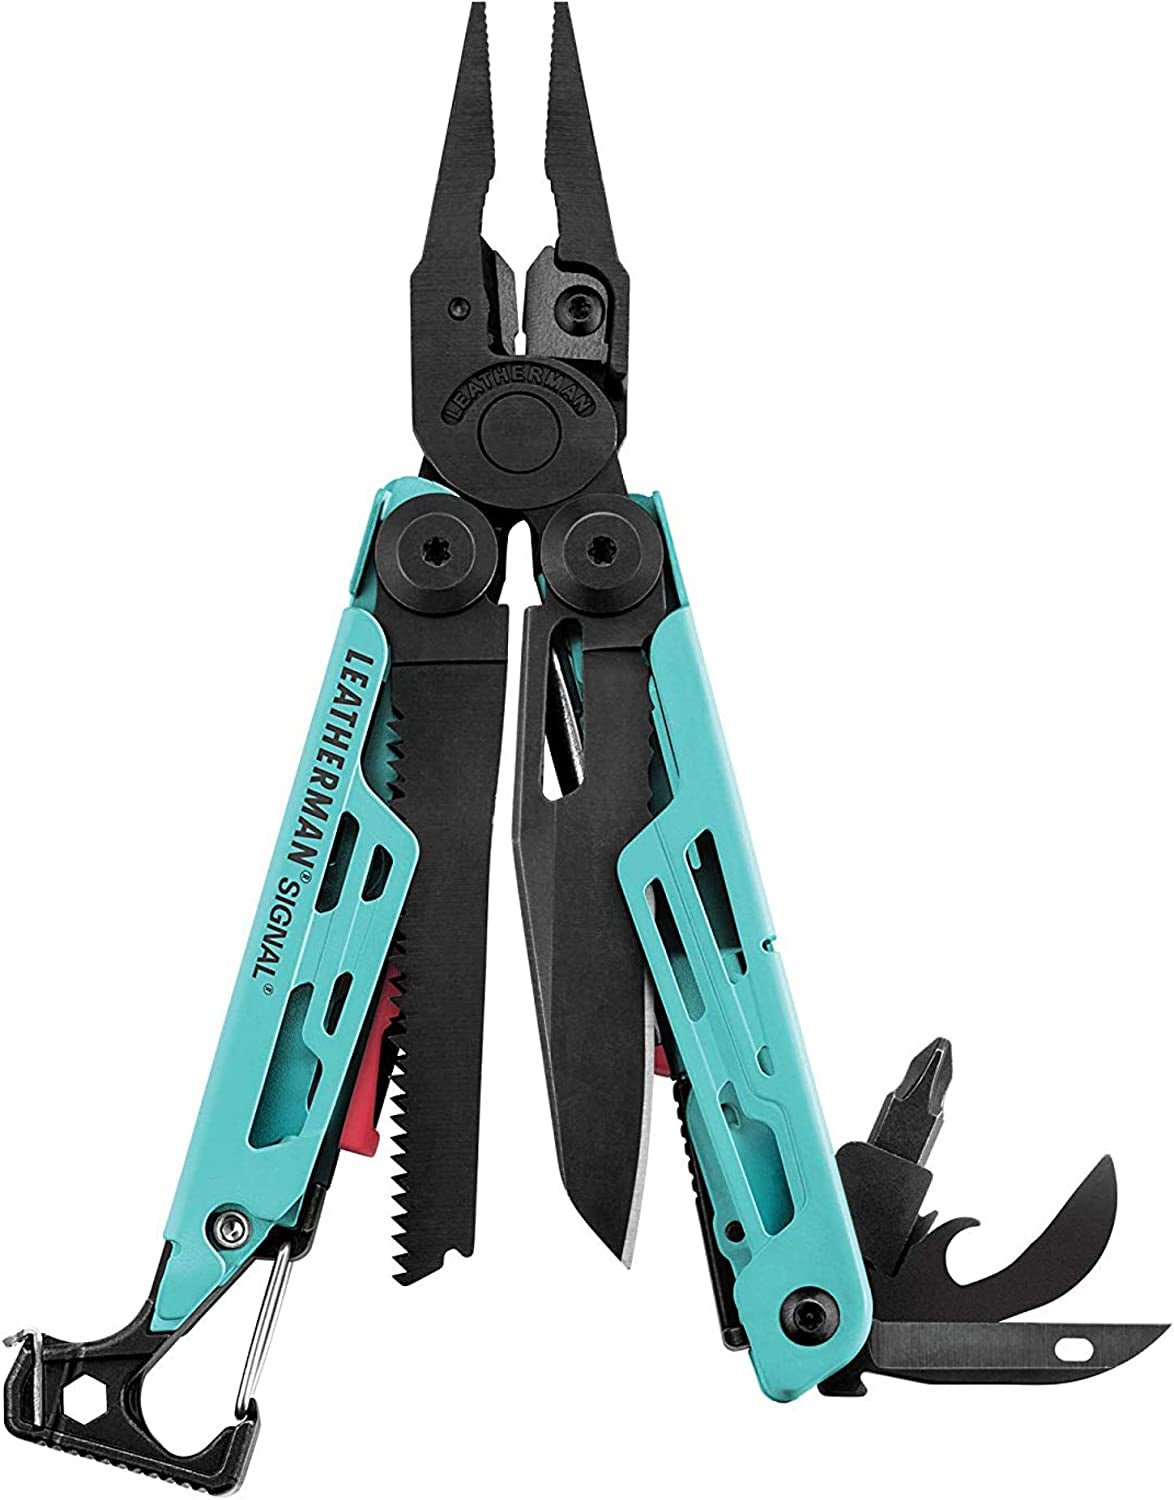 Leatherman, Leatherman SIGNAL® Aqua Colour Camping Multitool with Fire Starter, Hammer and Emergency Whistle, with Nylon Sheath